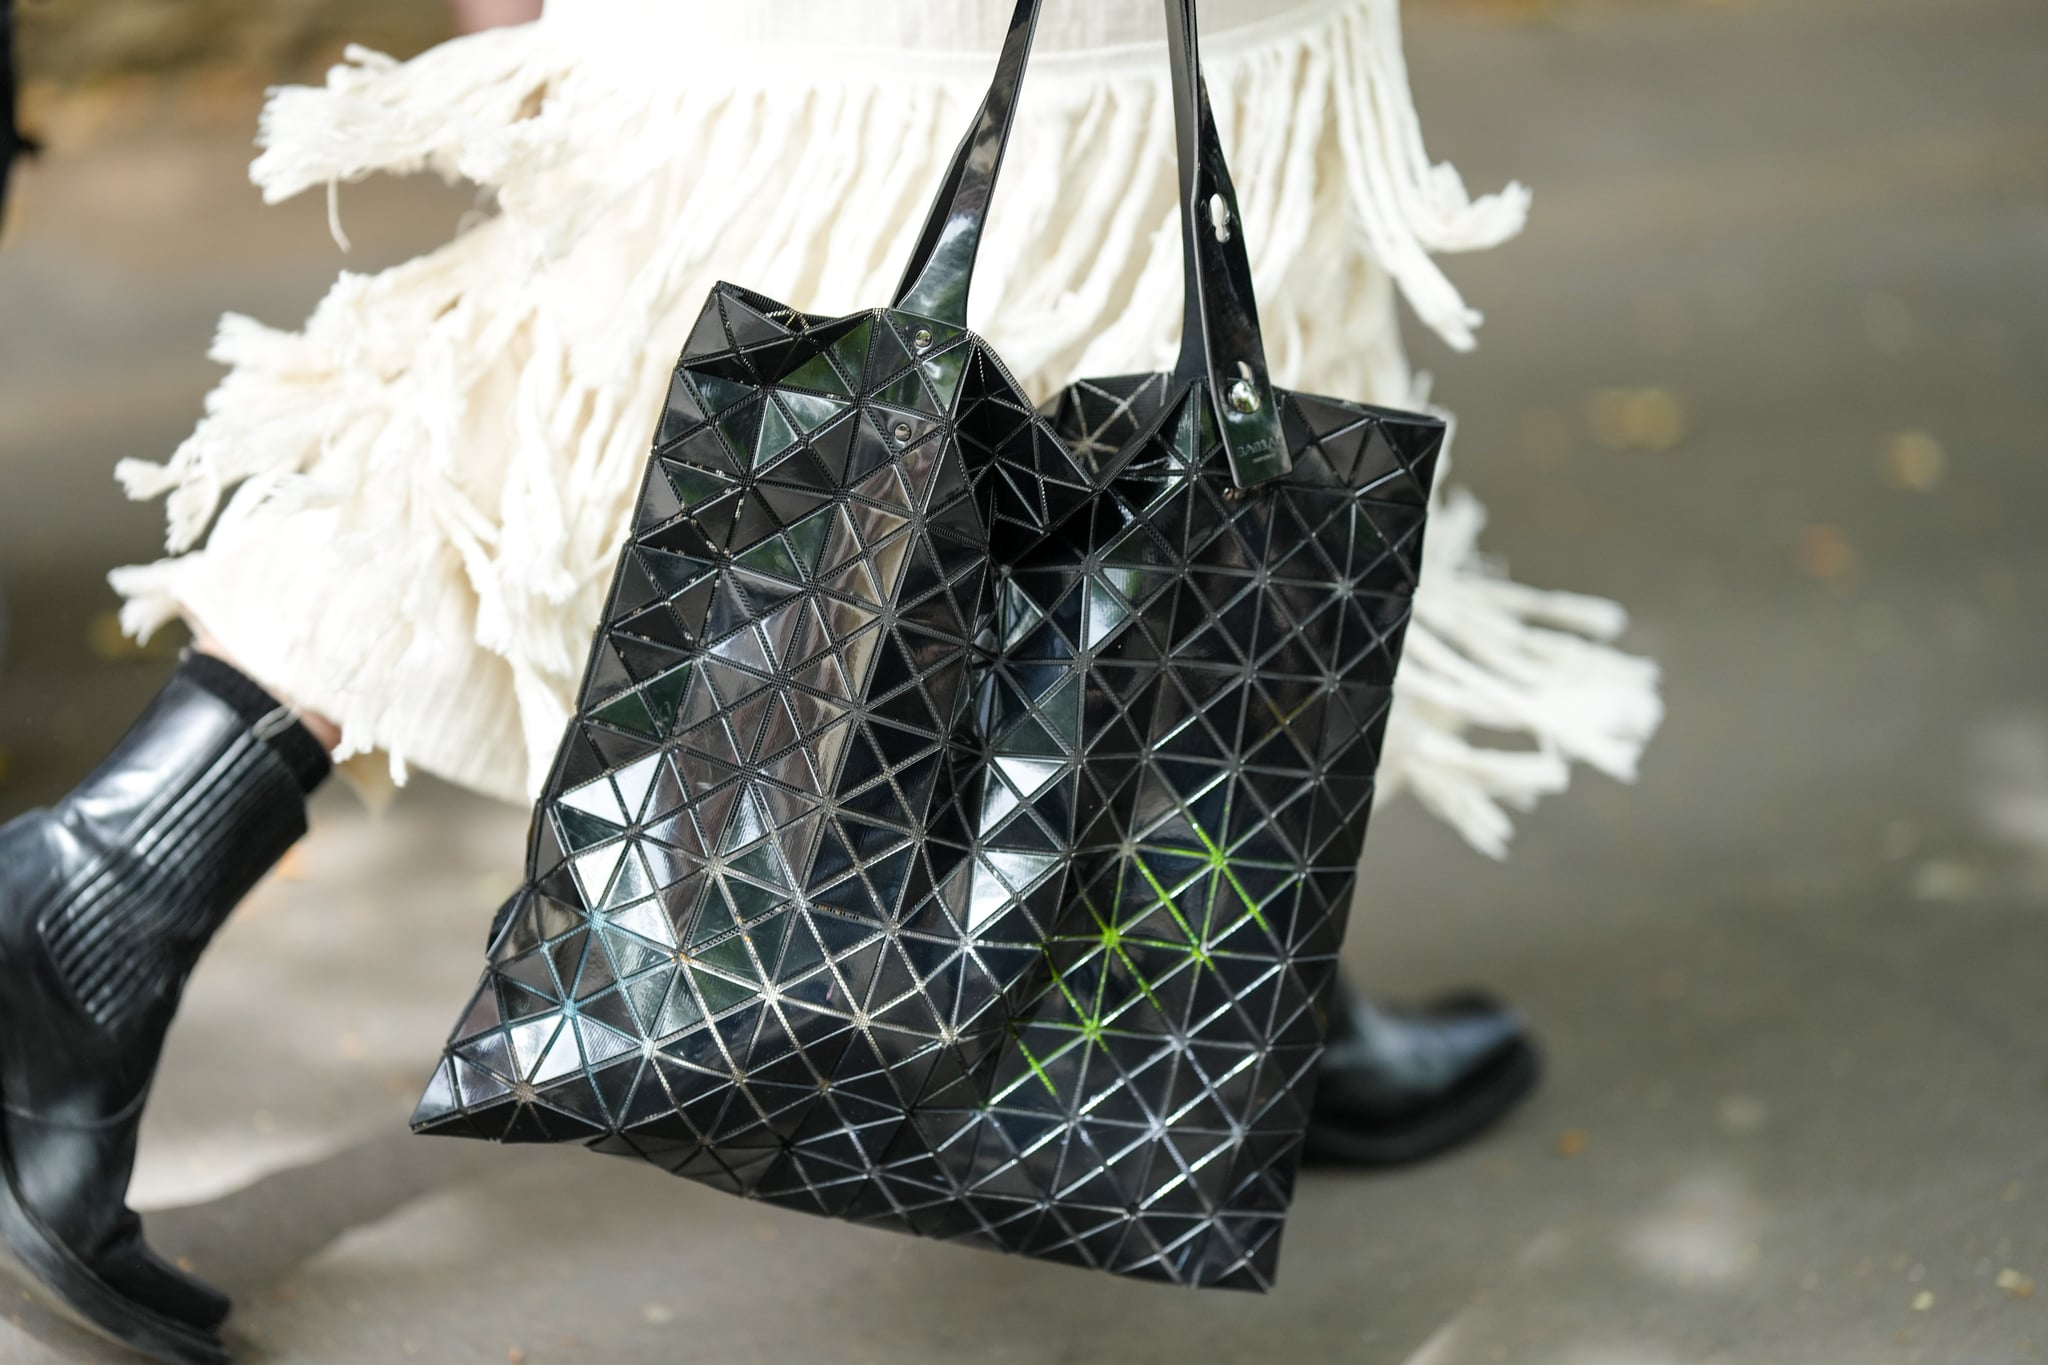 ISSEY MIYAKE's 'spiral grid' bags unfolds into mesh-like design with  adjustable sizes